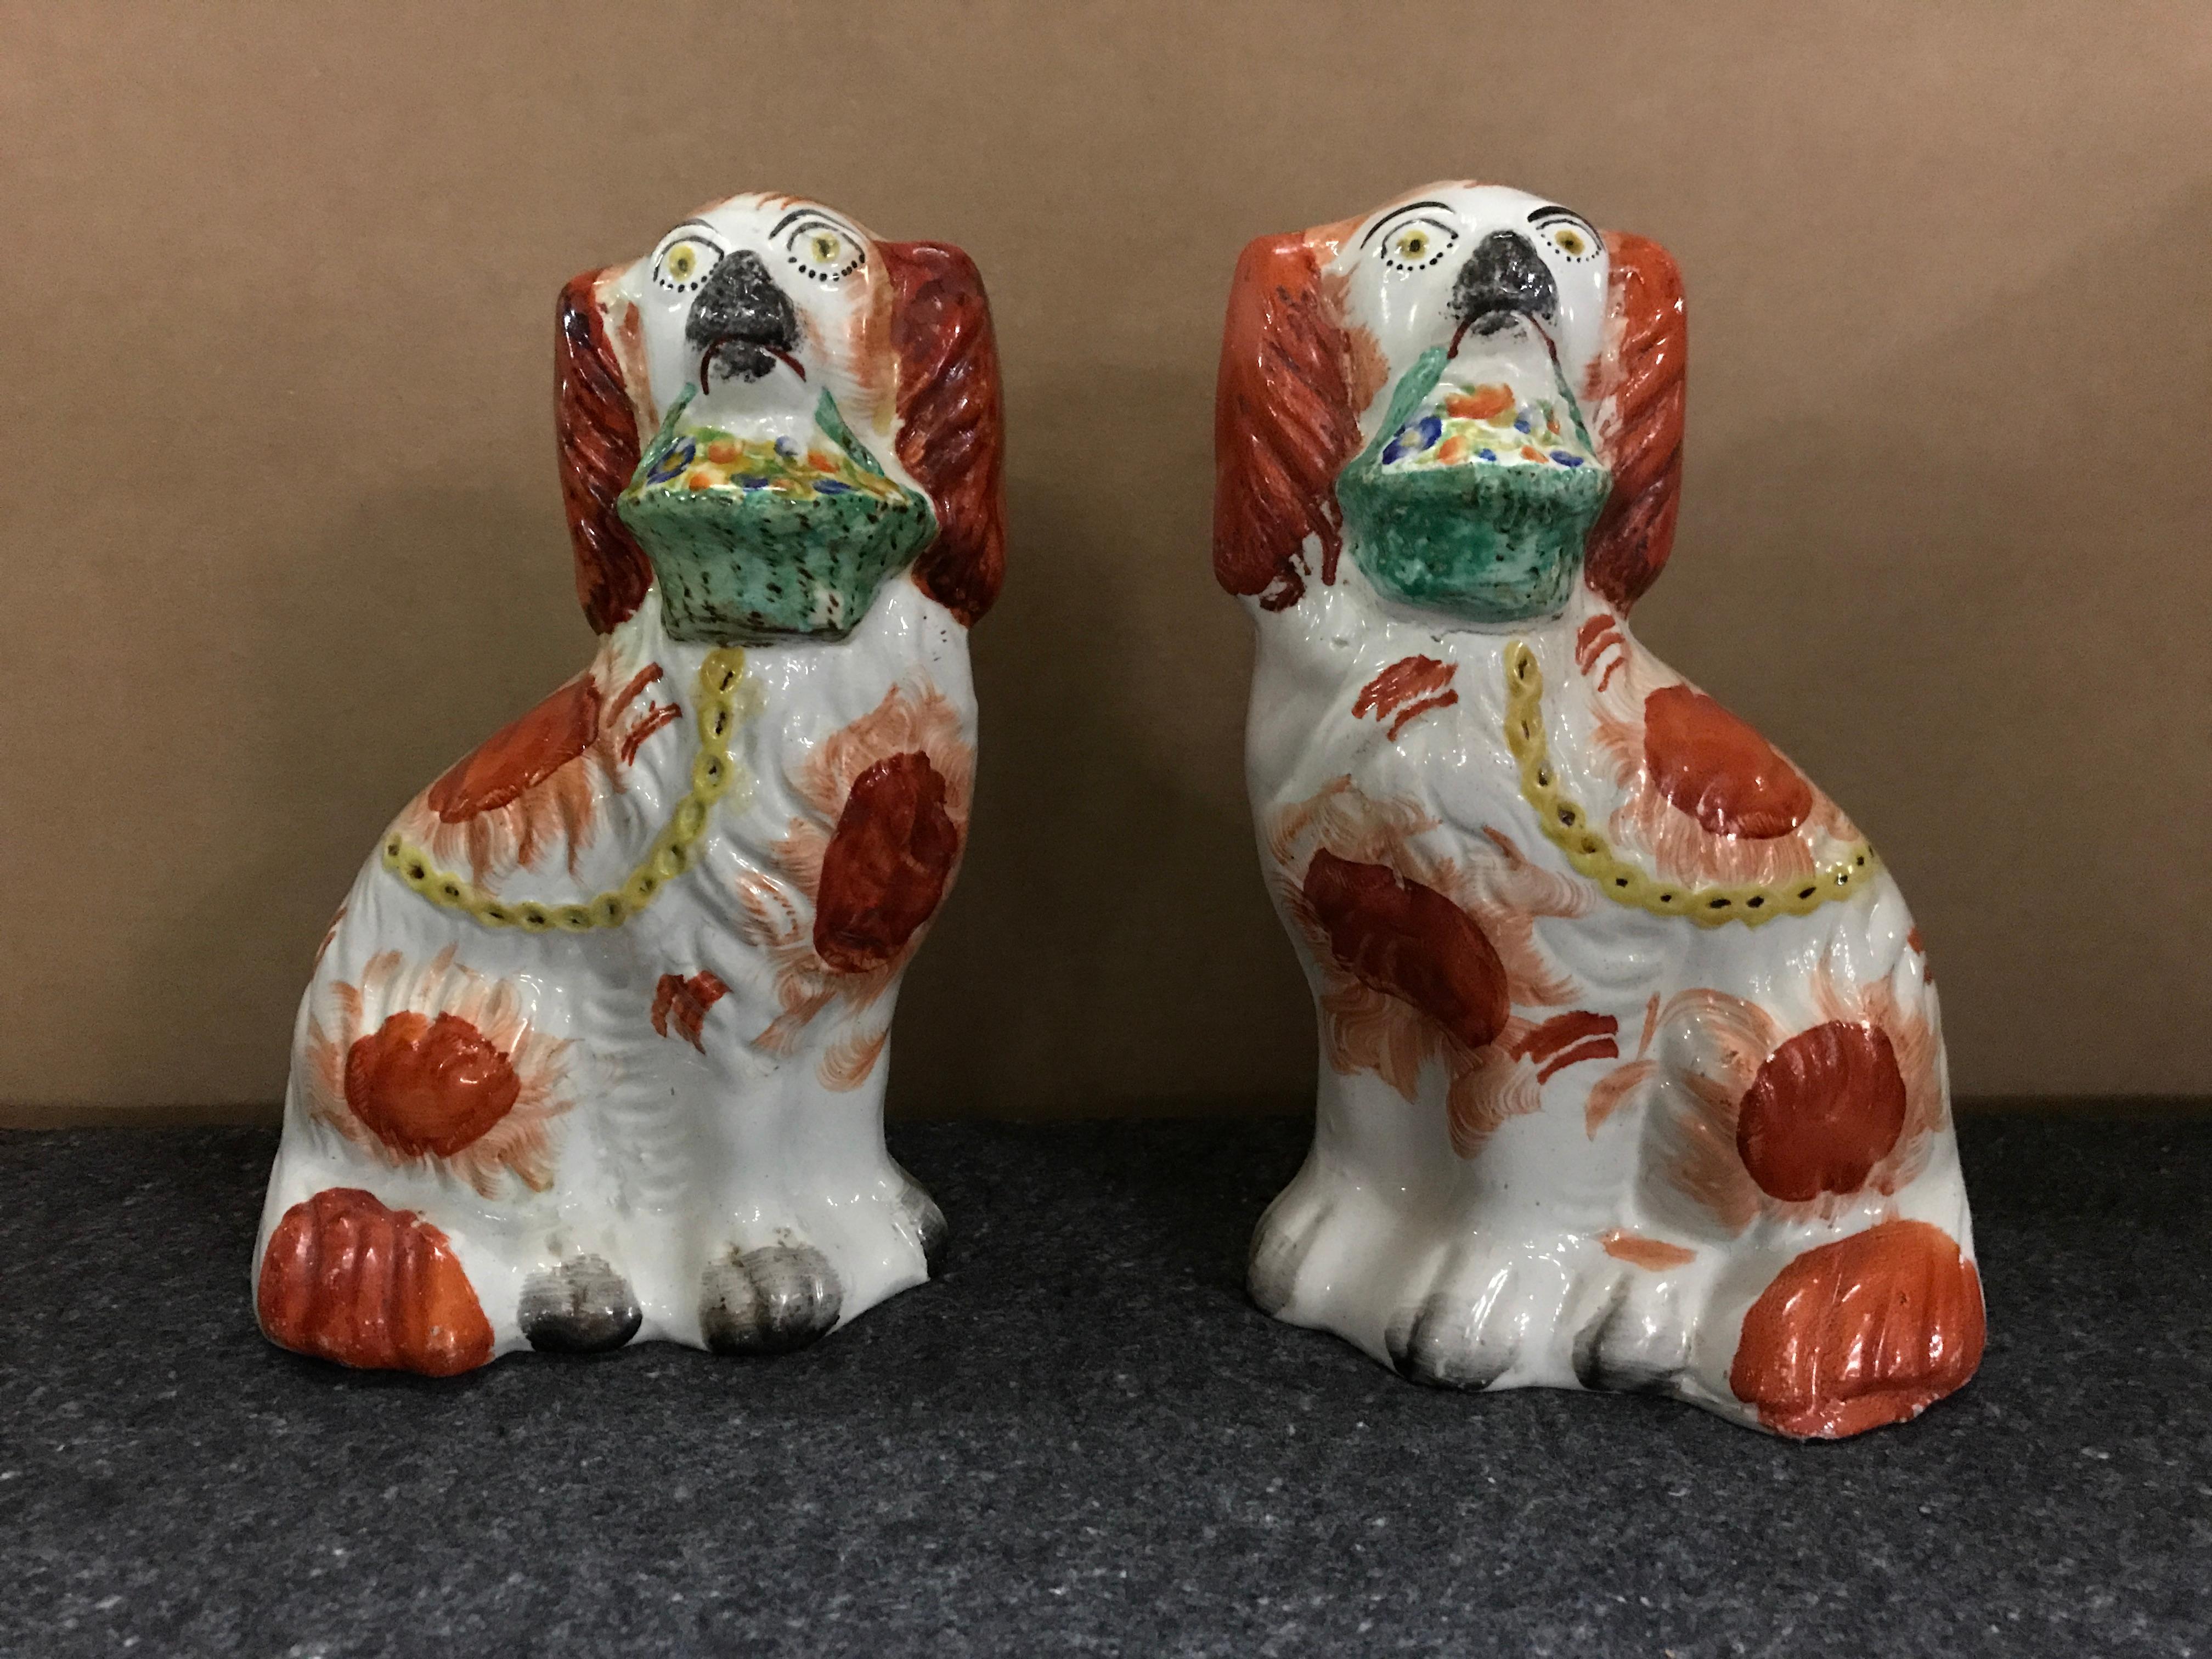 Rare pair of Staffordshire seated red spaniels with baskets of flowers, each one well painted with expressive faces and colorful floral baskets.

 